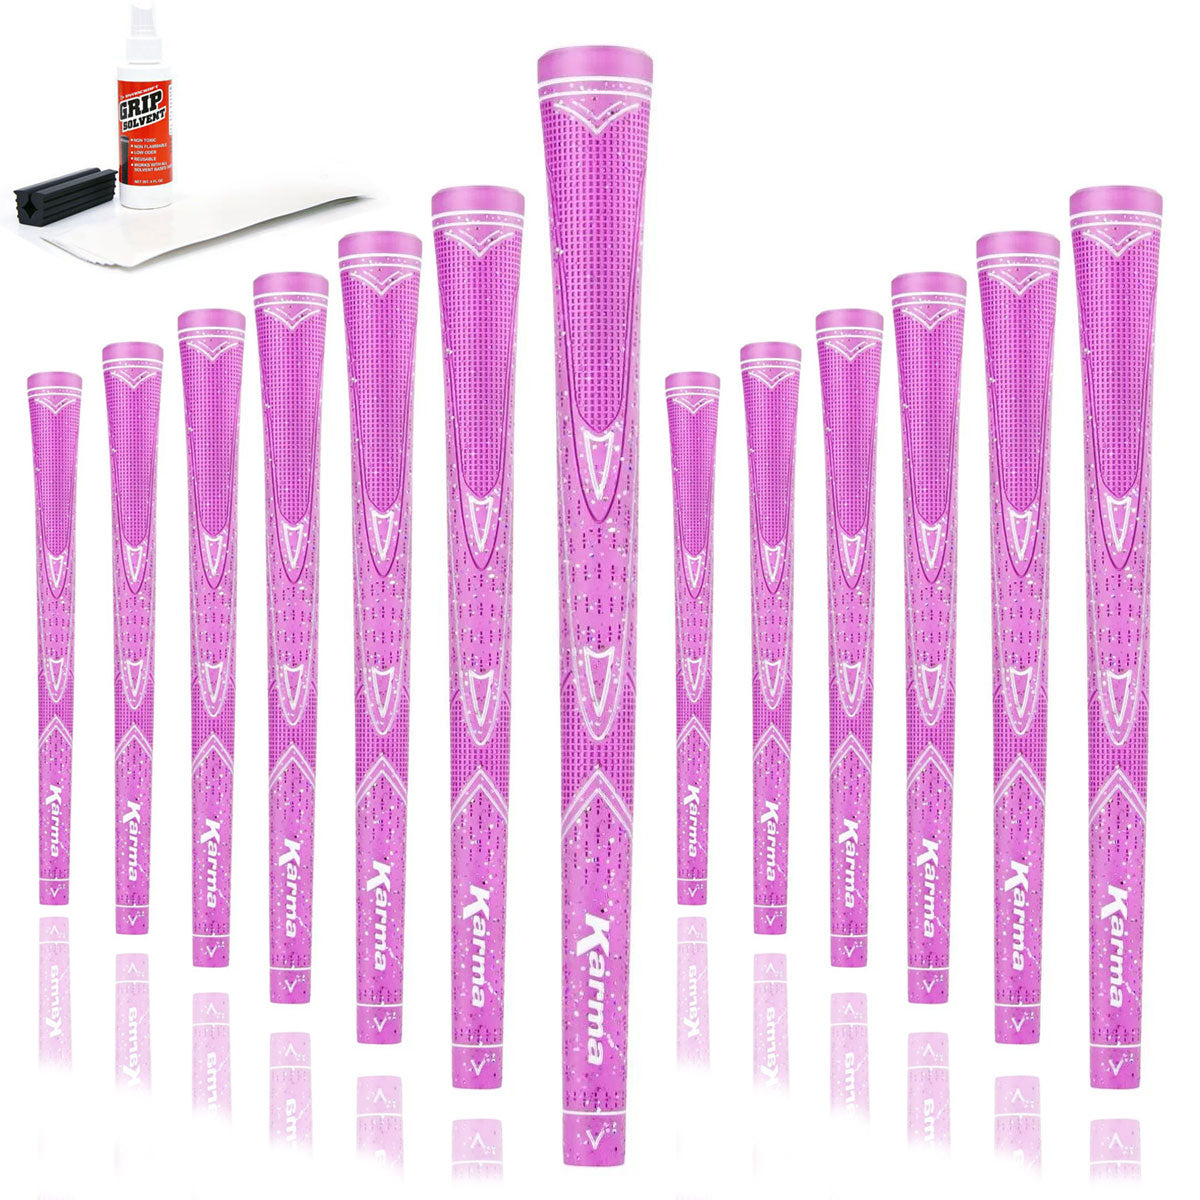 13 Karma Sparkle Pink golf grips, golf grip tape strips, bottle of grip solvent and rubber shaft clamp